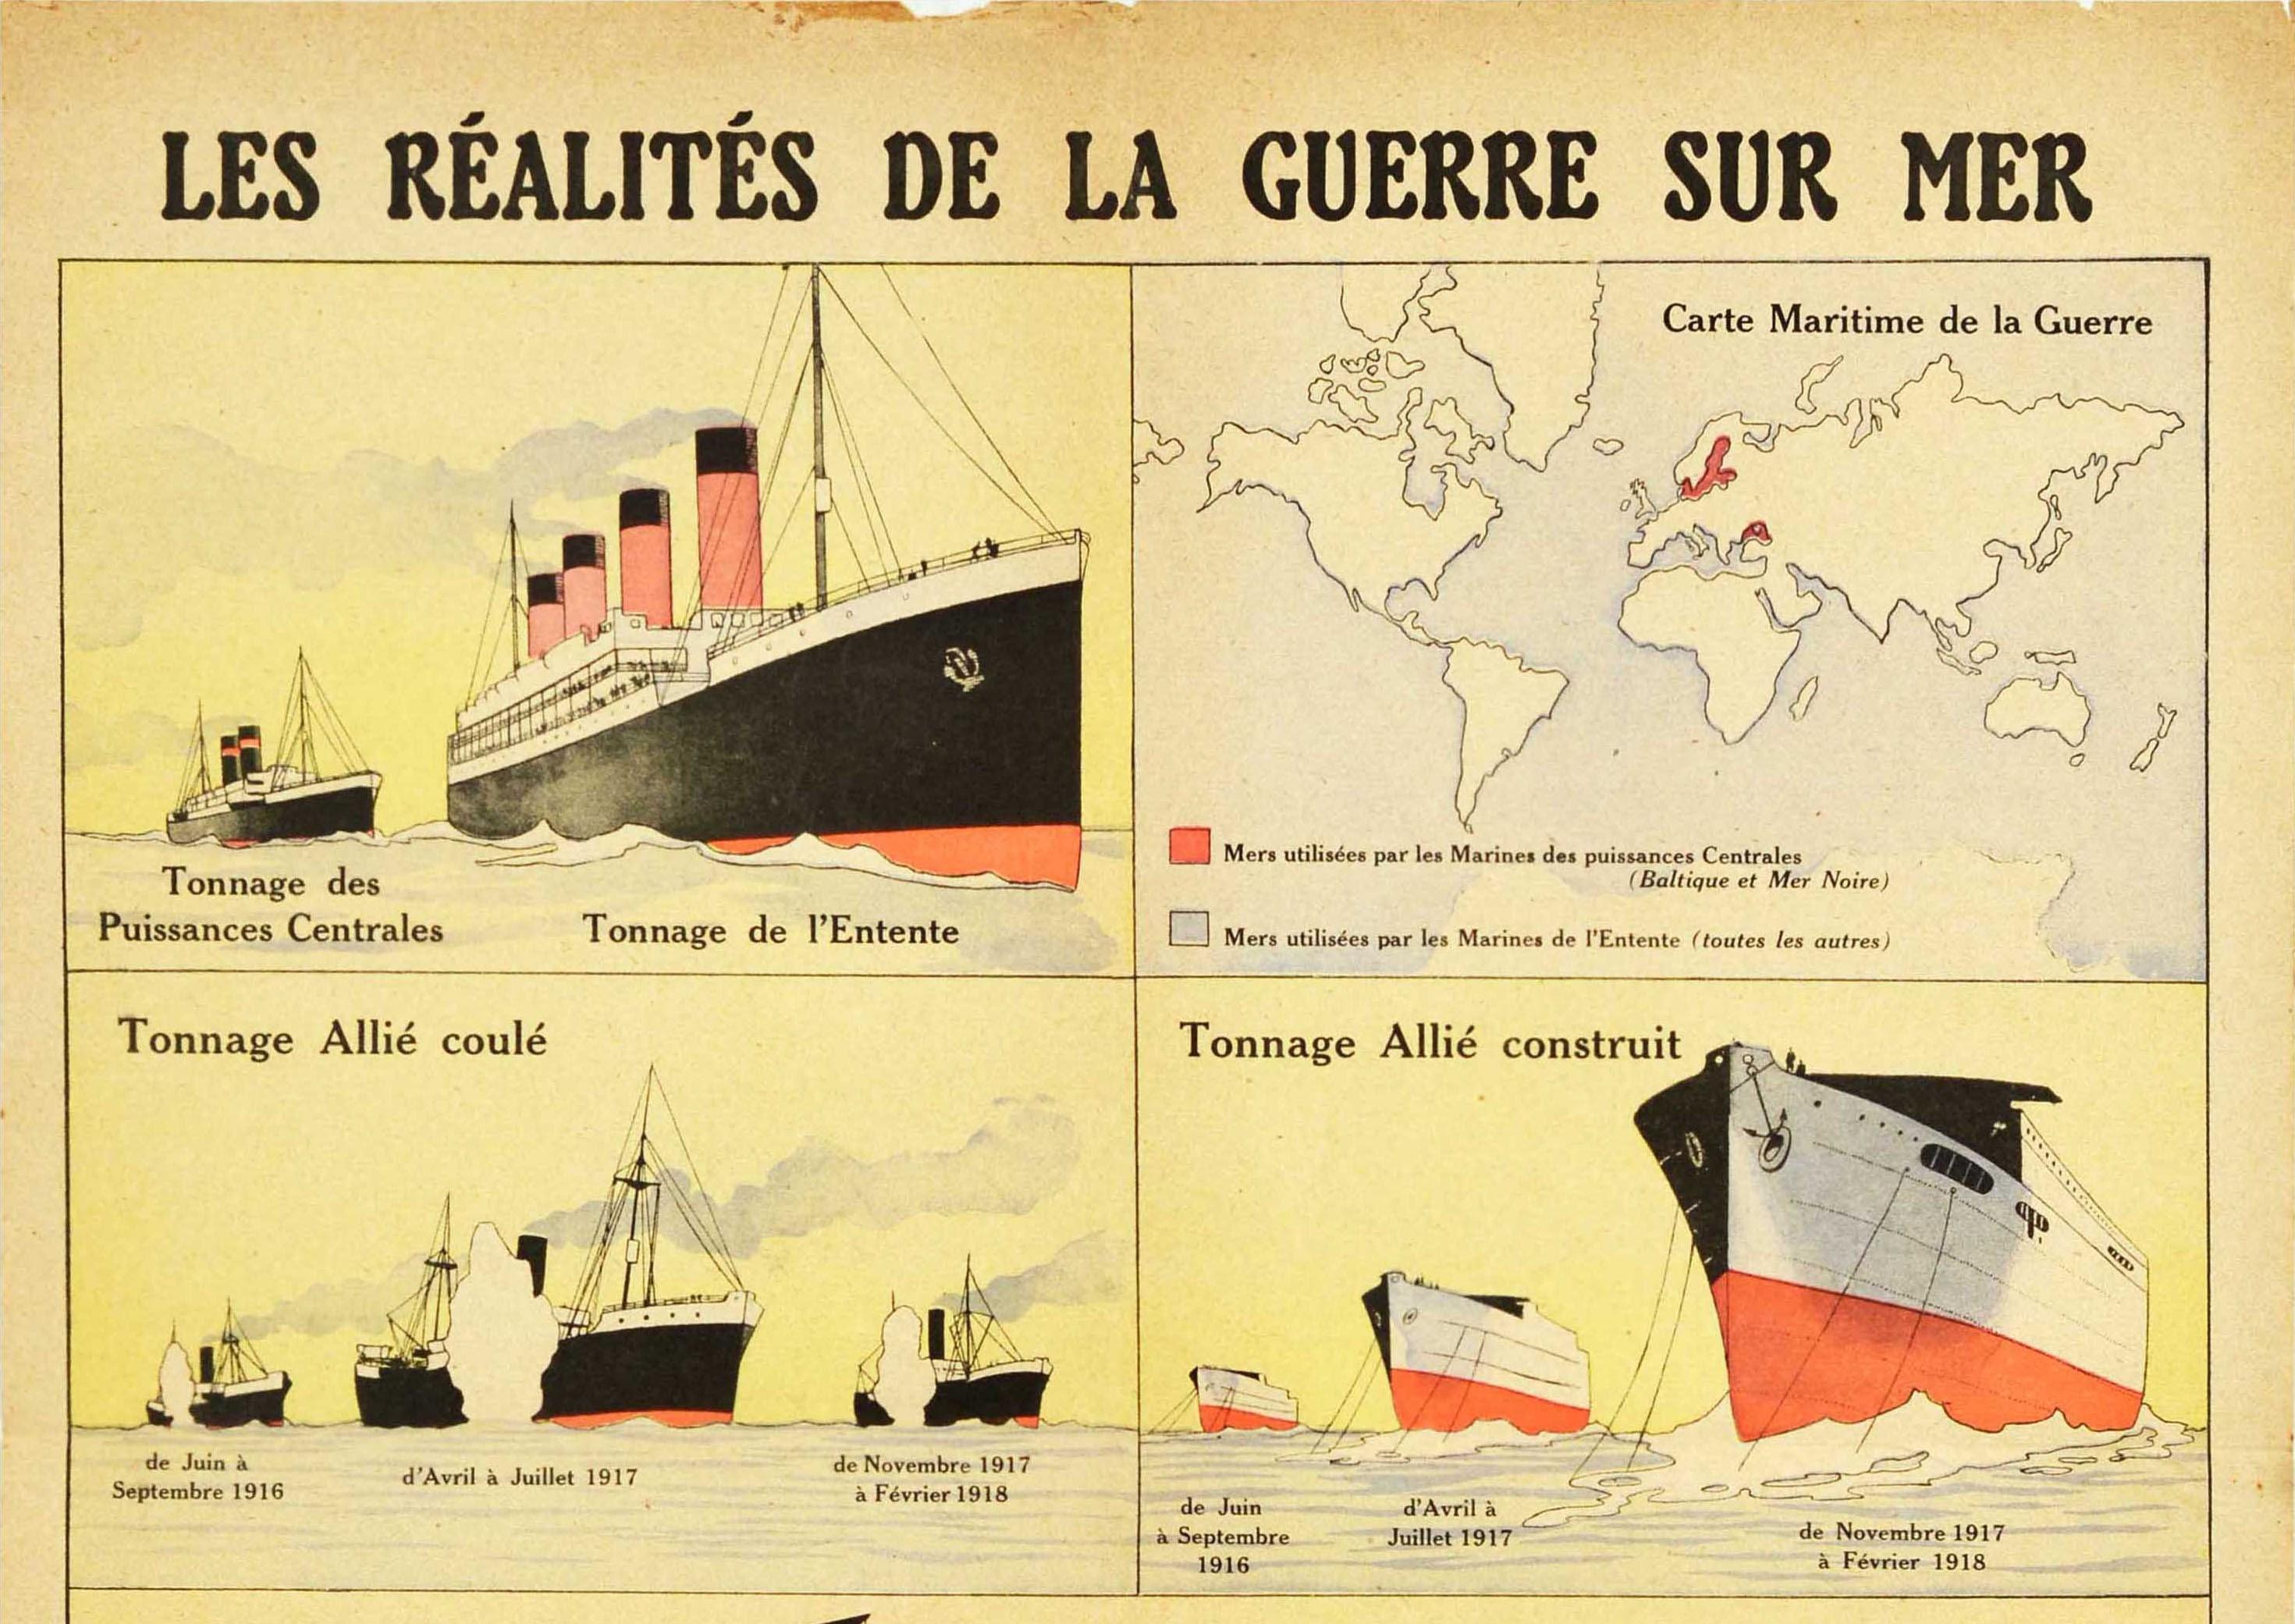 Original Antique WWI Poster Reality Of War At Sea Ship Submarine Guerre Sur Mer - Print by Leon Haffner